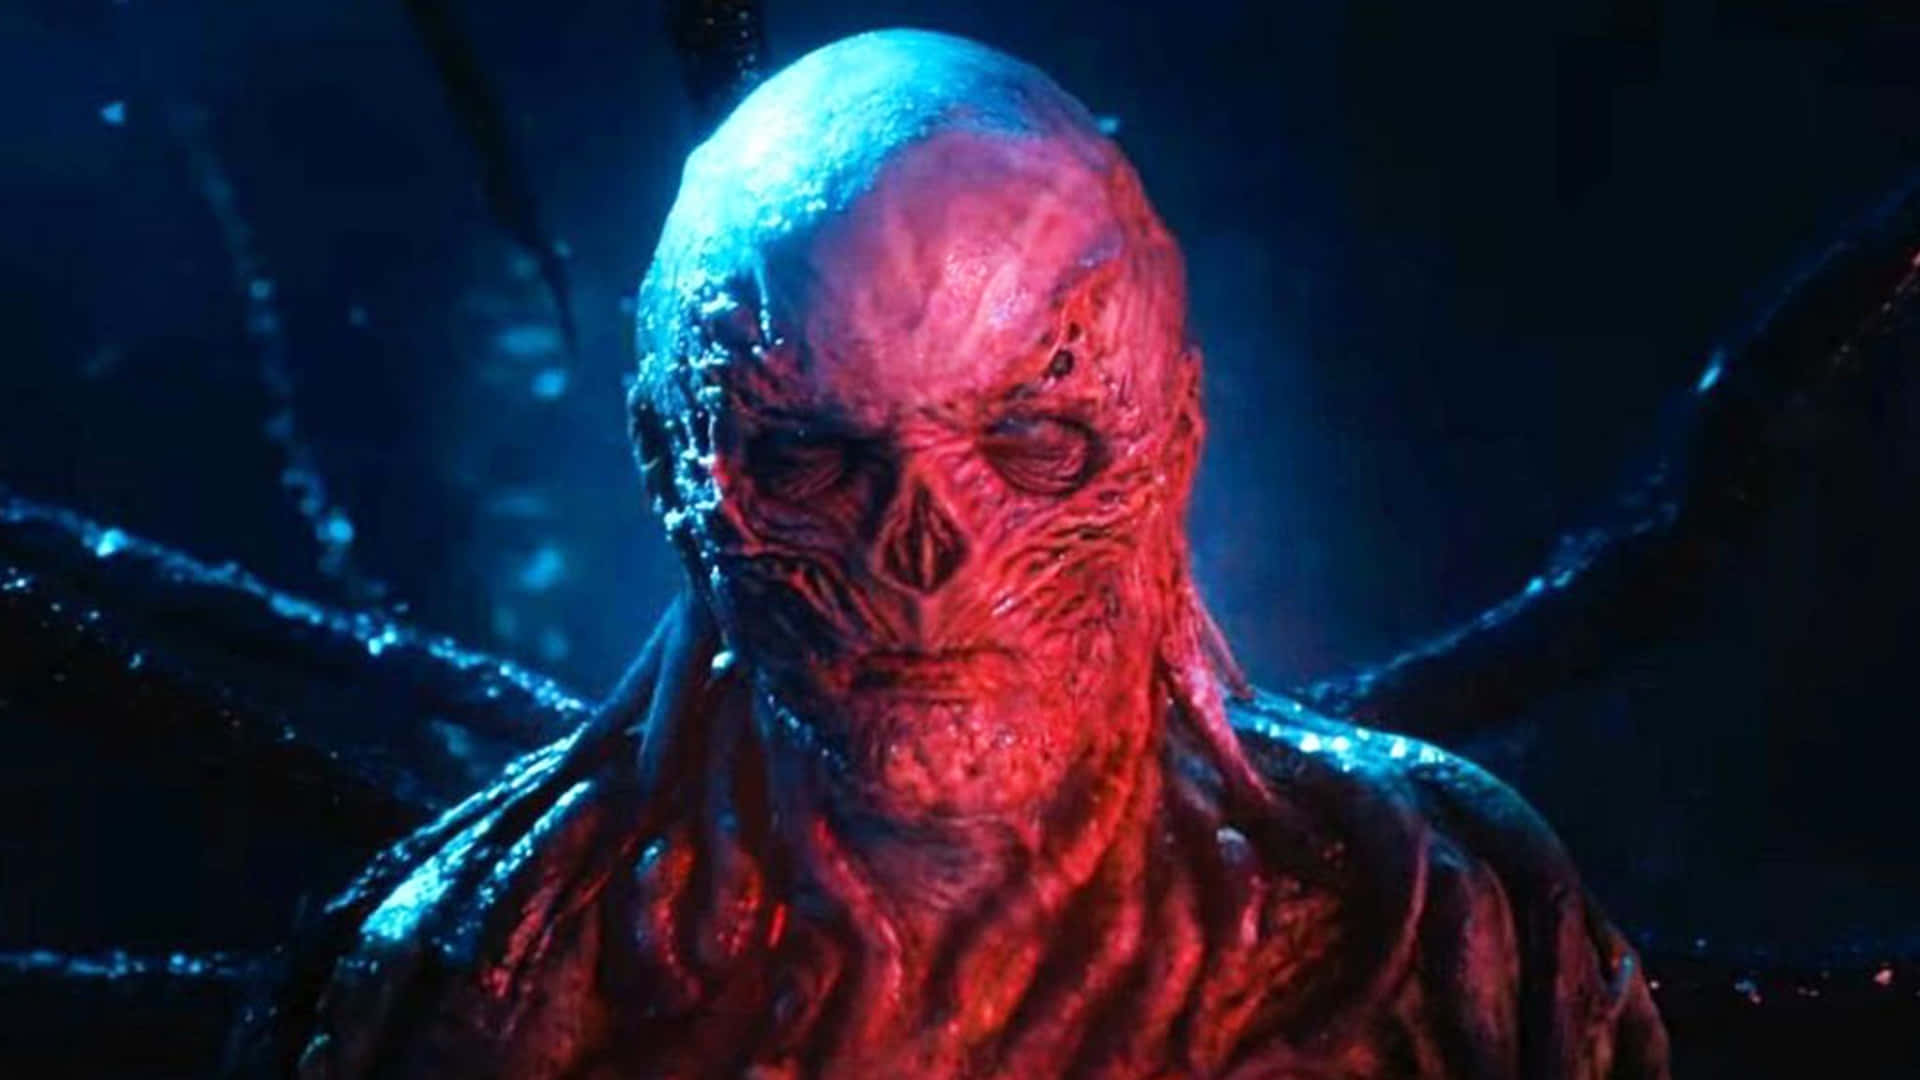 A close up shot of Vecna bathed in red light in Stranger Things season 4